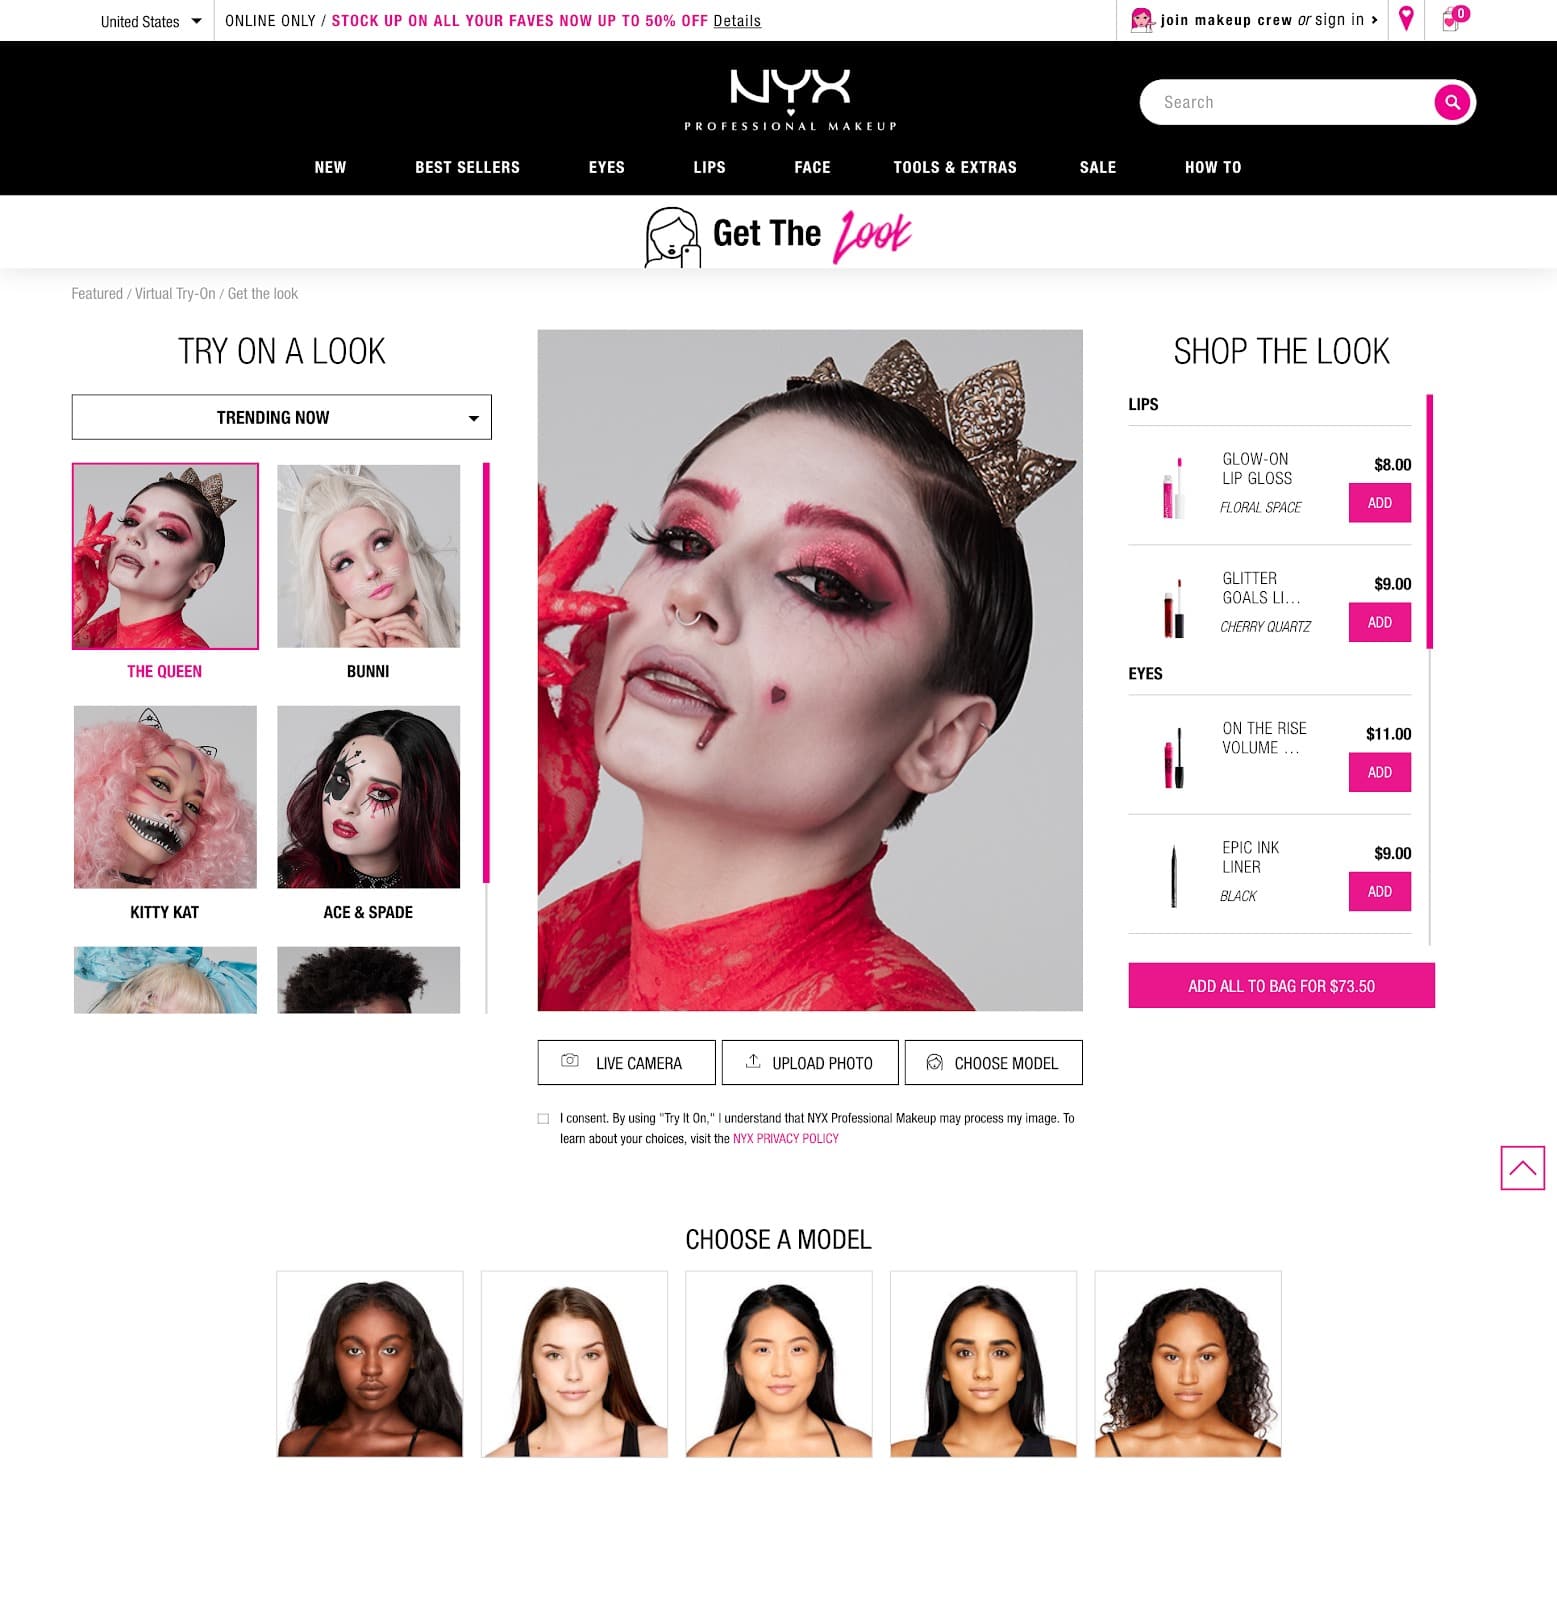 Nyx provides users the chance to see how makeup will look on them, allowing user engagement even online.